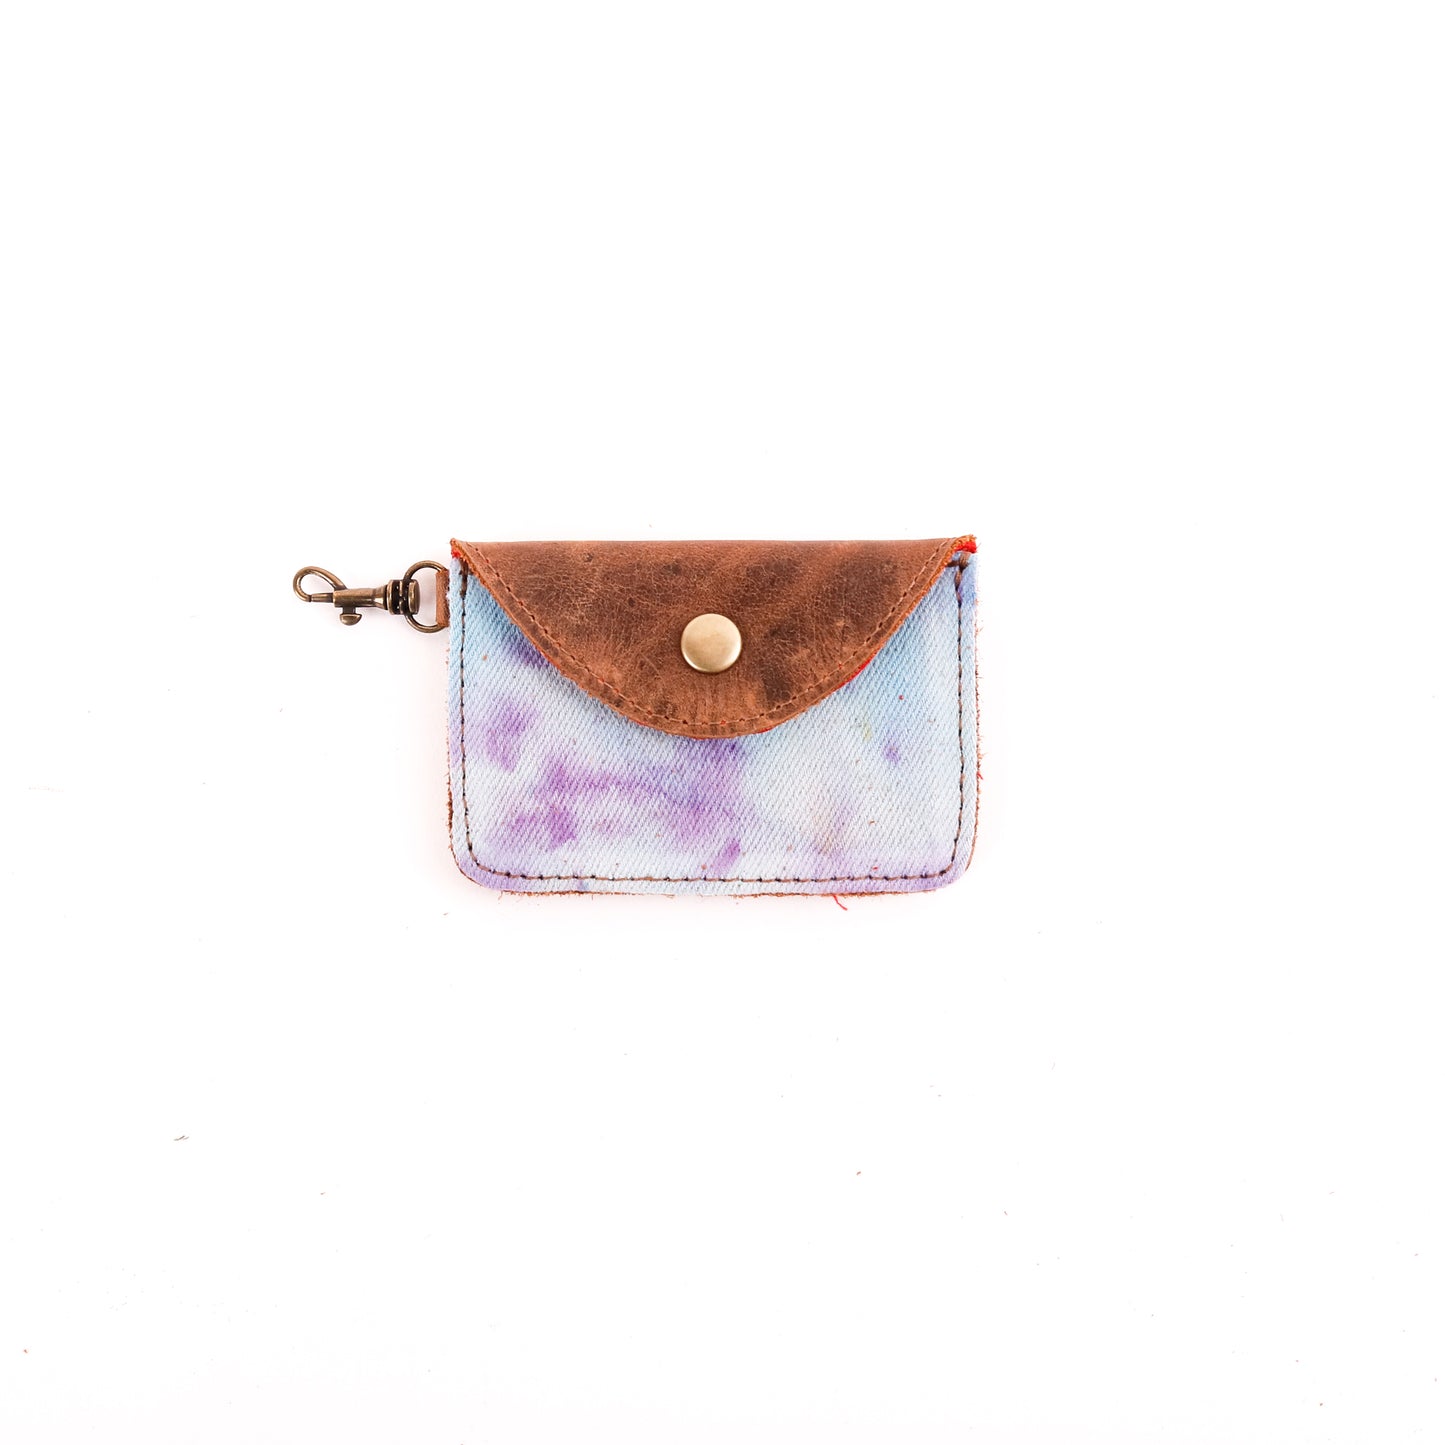 CARD WALLET - TIE DYE - UPCYCLED DENIM - CAOBA LEATHER - NO. 10006